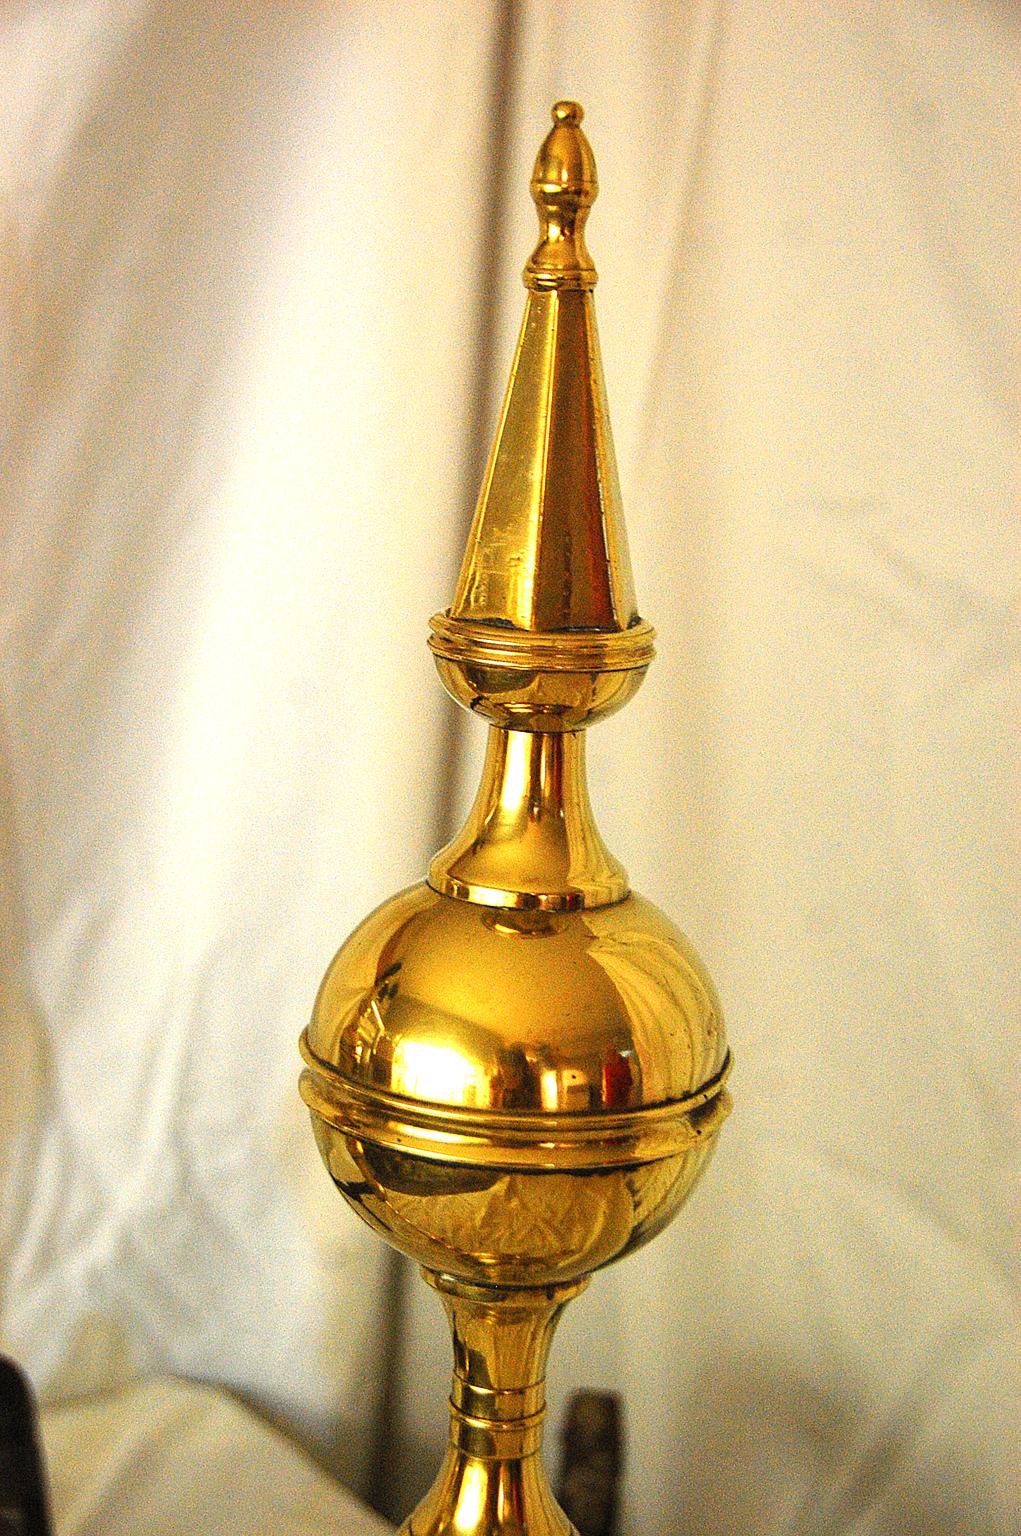 American Federal period brass spire and belted ball top andirons, Impressed Signature:
R. Wittingham N(ew) YORK, seamed, hexagonal spire and column, cabriole legs, ball feet; refurbished iron log carriers, casting flaw on the back surface of the